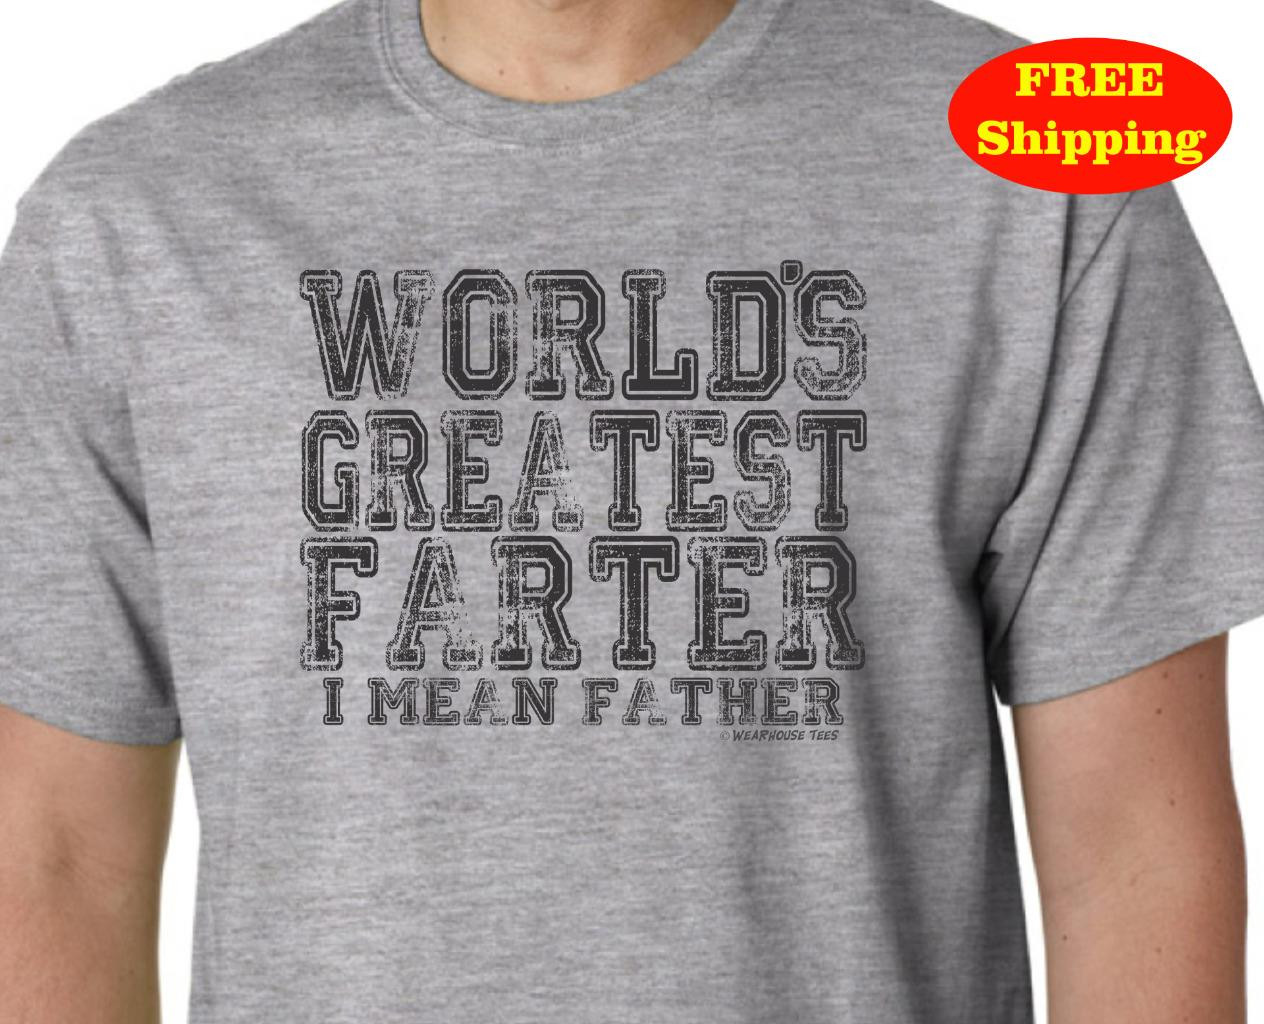 Gift Ideas For Father'S Day
 Funny World s Greatest FARTER Father T Shirt Birthday